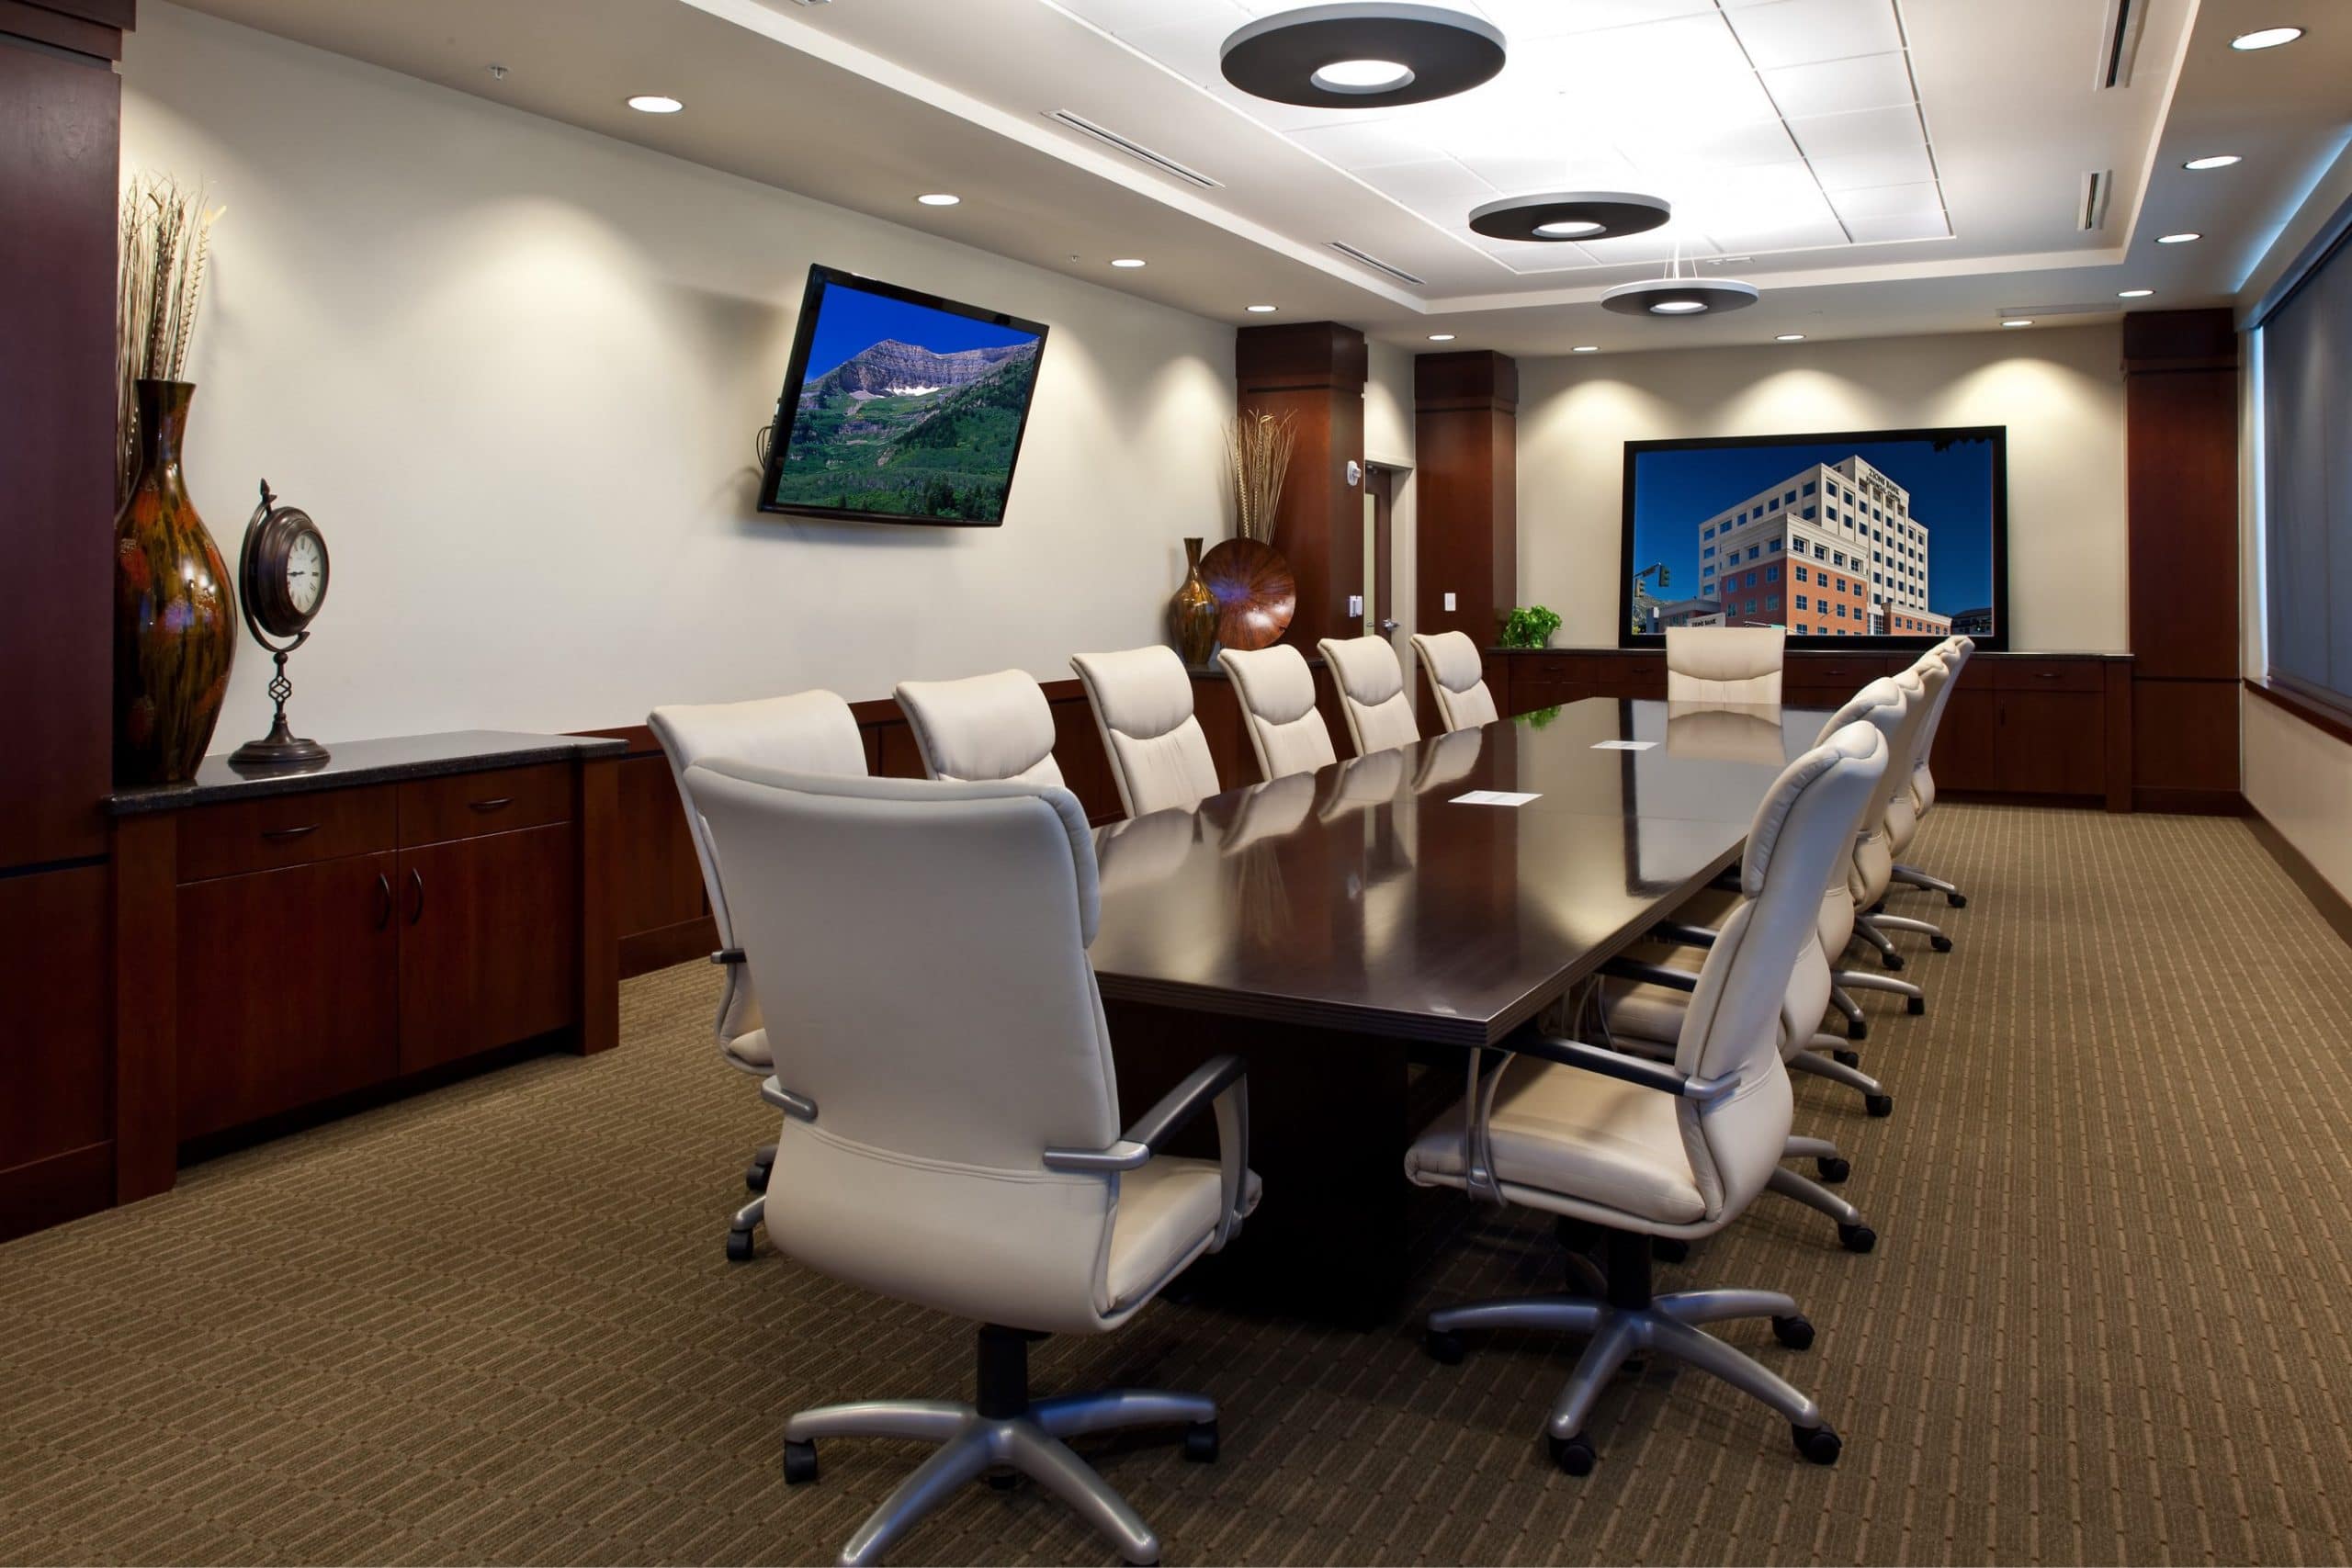 Conference room in Zions Bank Financial Center, architectural design by Elliott Workgroup